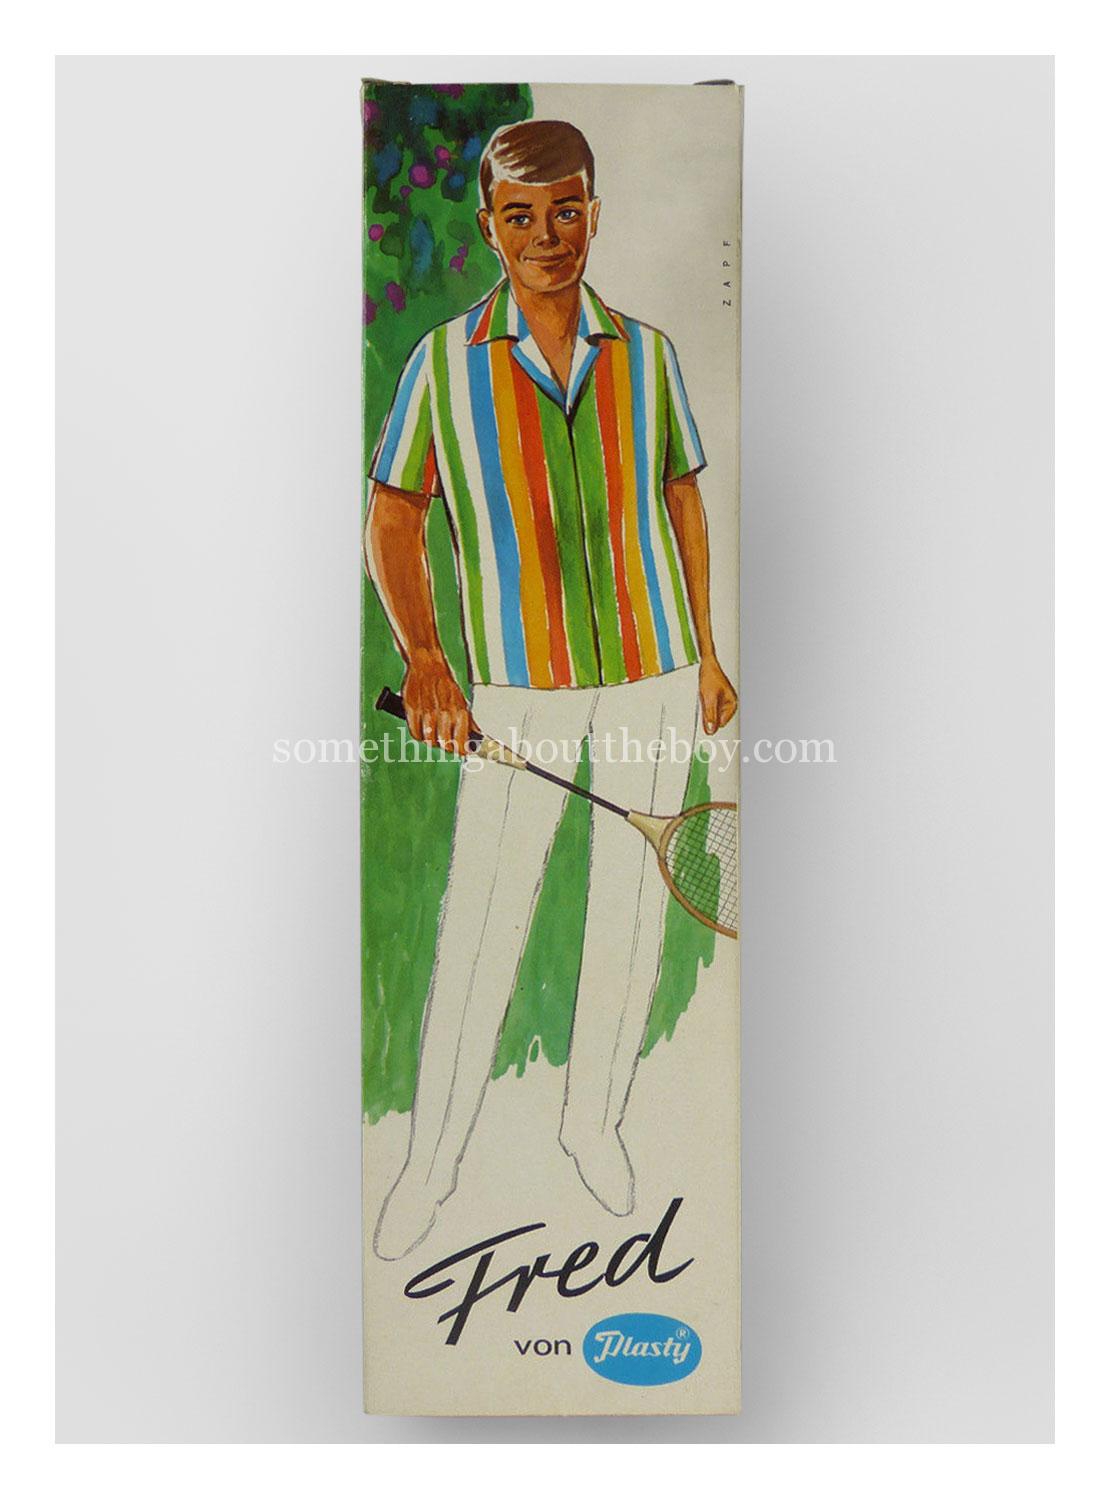 c.1970 Fred original packaging by Plasty